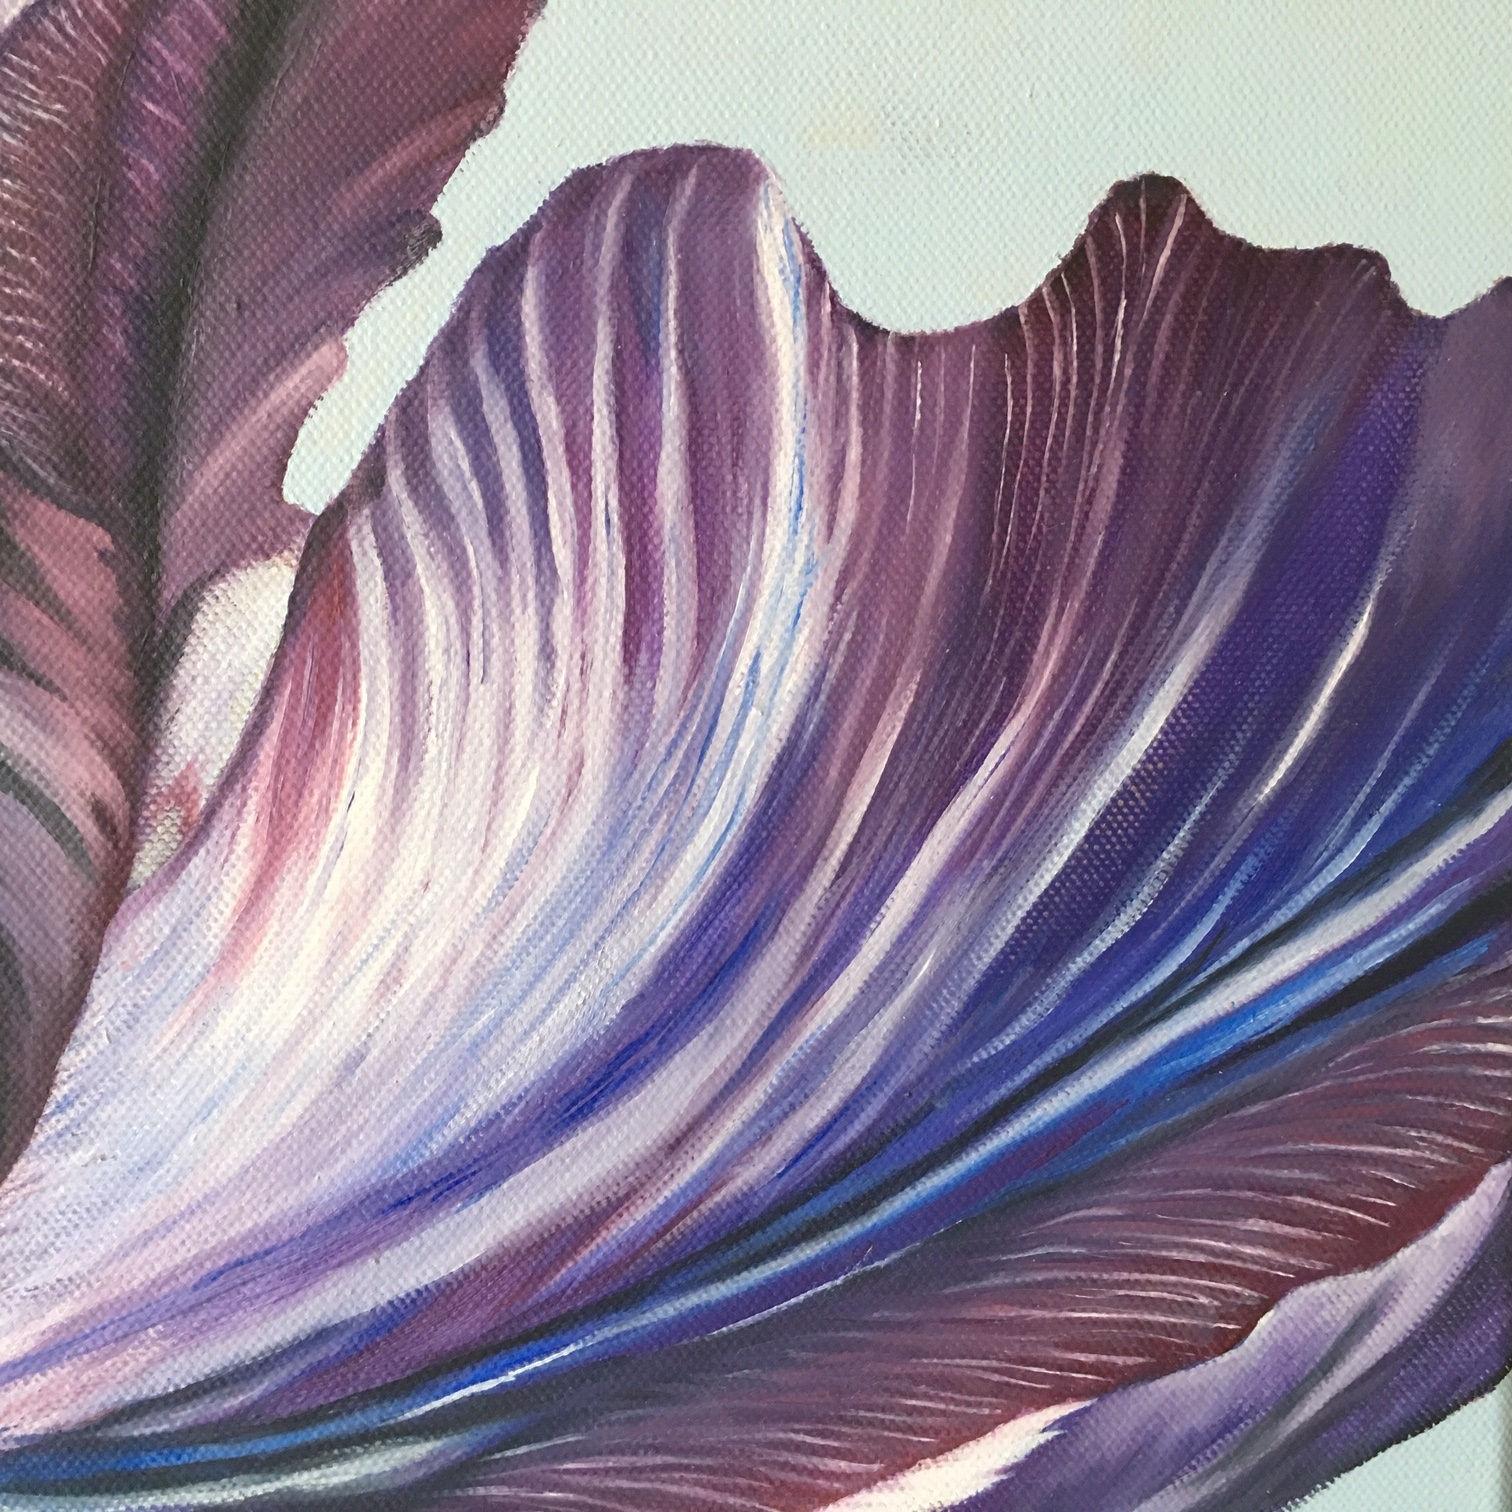 A close-up oil on canvas painting of a blue tulip. 
It is one of four paintings of vividly colored and almost stylistic flowers.

About the artist:

Esther Hansen grew up in the countryside and now lives on a farm. She started her painting